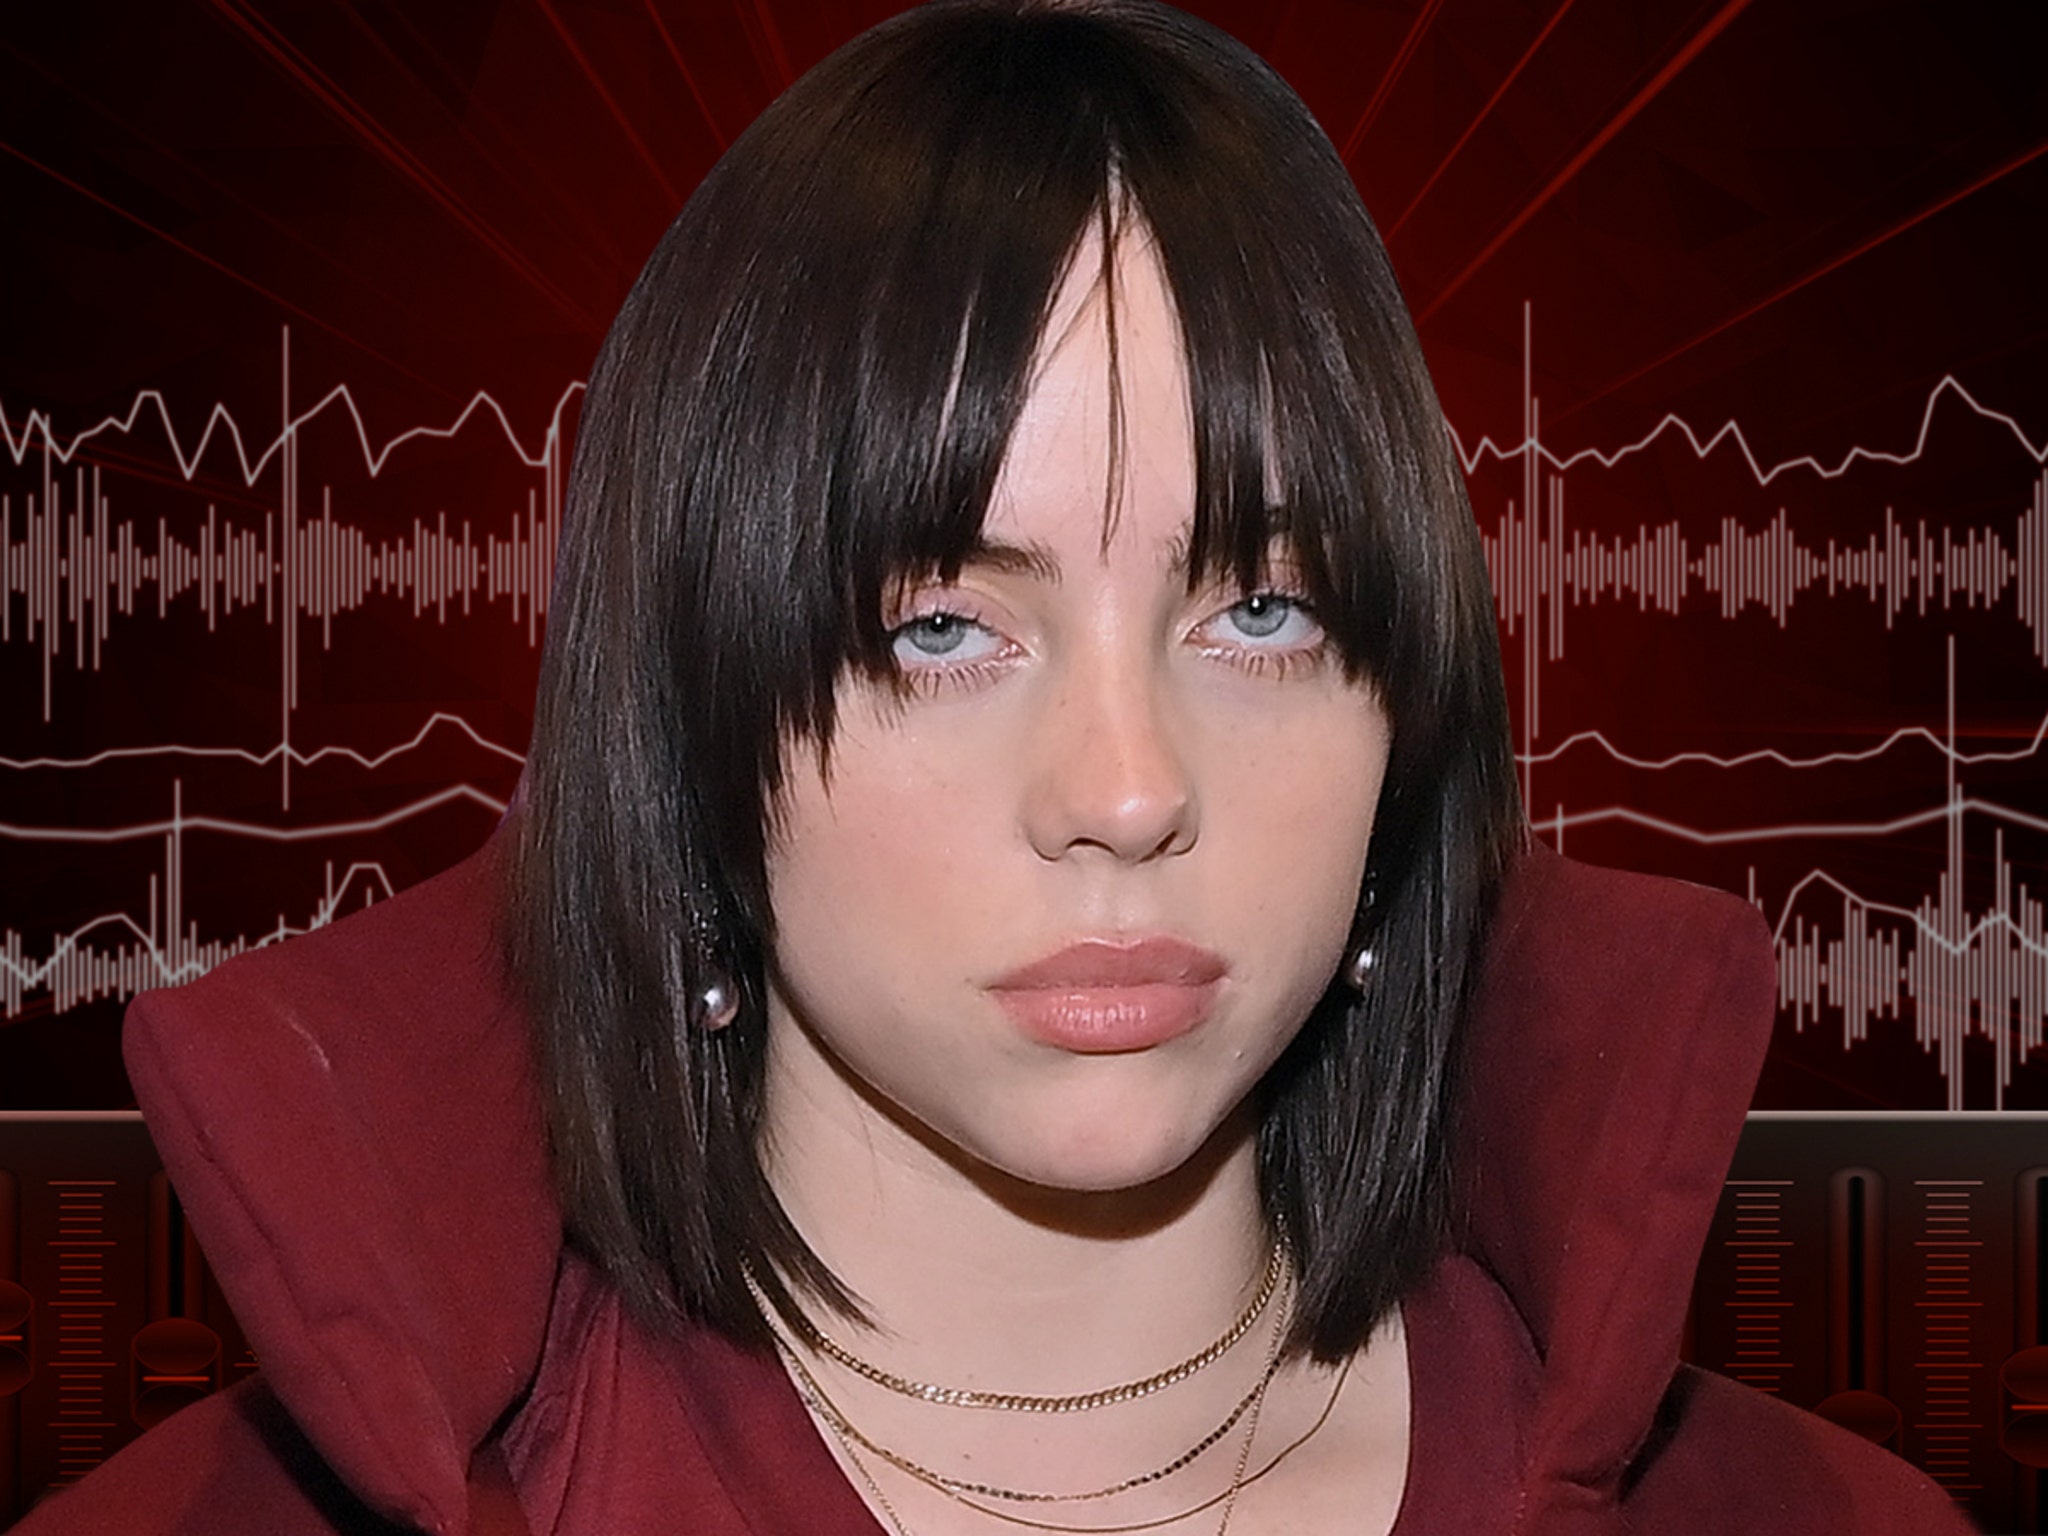 Download Very Hard Sex Vedio - Billie Eilish Says She Started Watching Porn at 11, Calls it 'Disgrace'